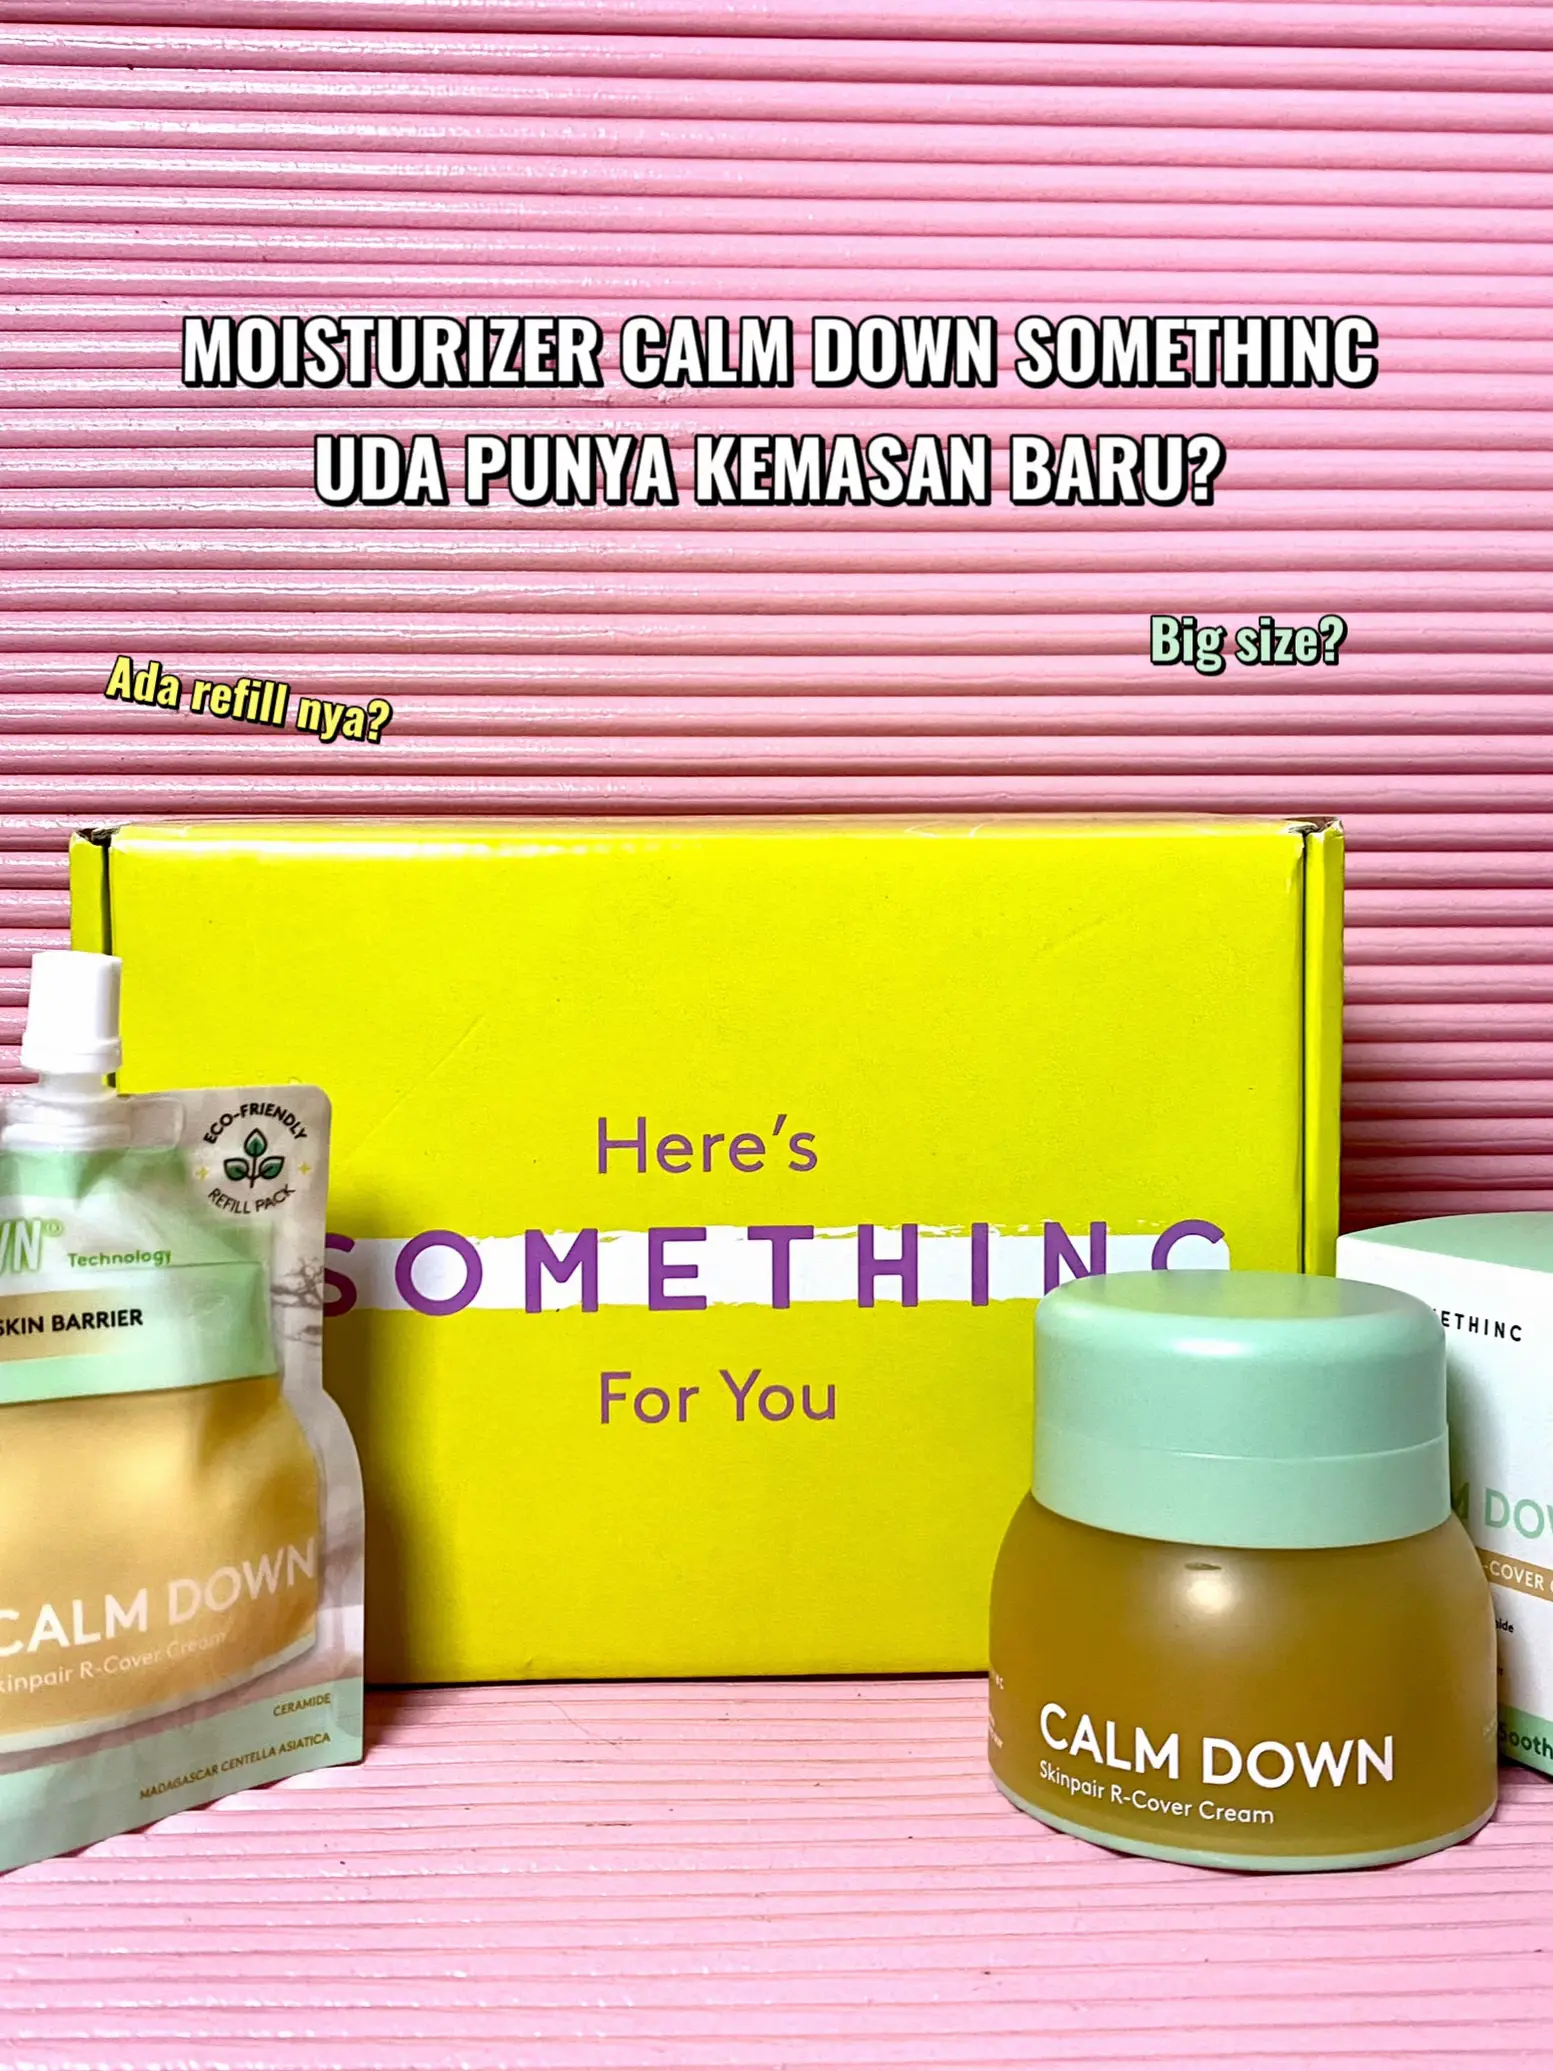 Here's Exactly What's Wrong With the Phrase 'Calm Down